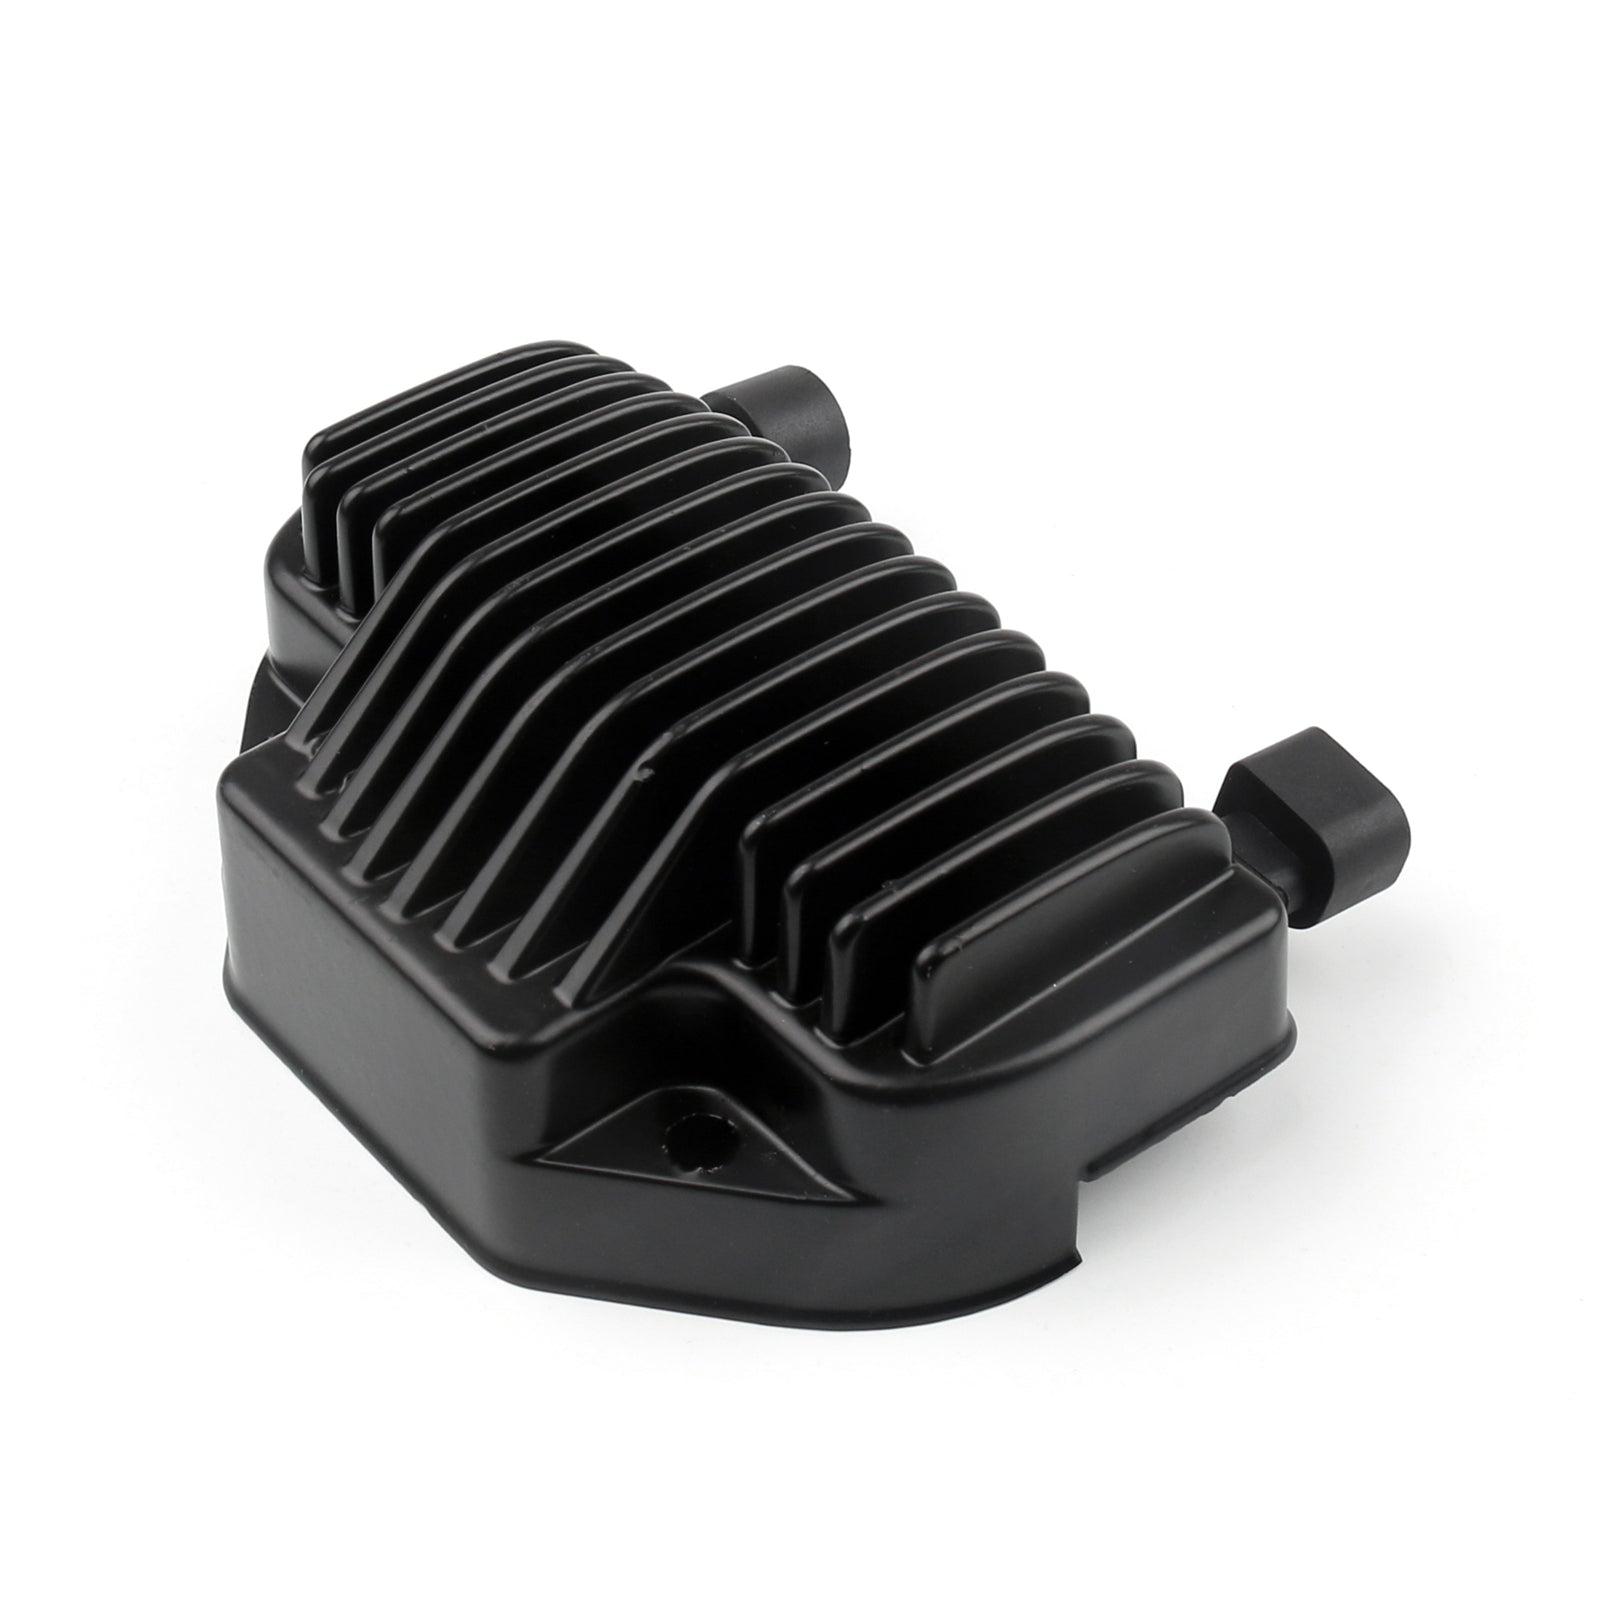 Harley Voltage Regulator Rectifier Fit For Harley FXDWG/Dyna Wide Glide 105th Anniversary 2008 FXDL/Dyna Low Rider 2014